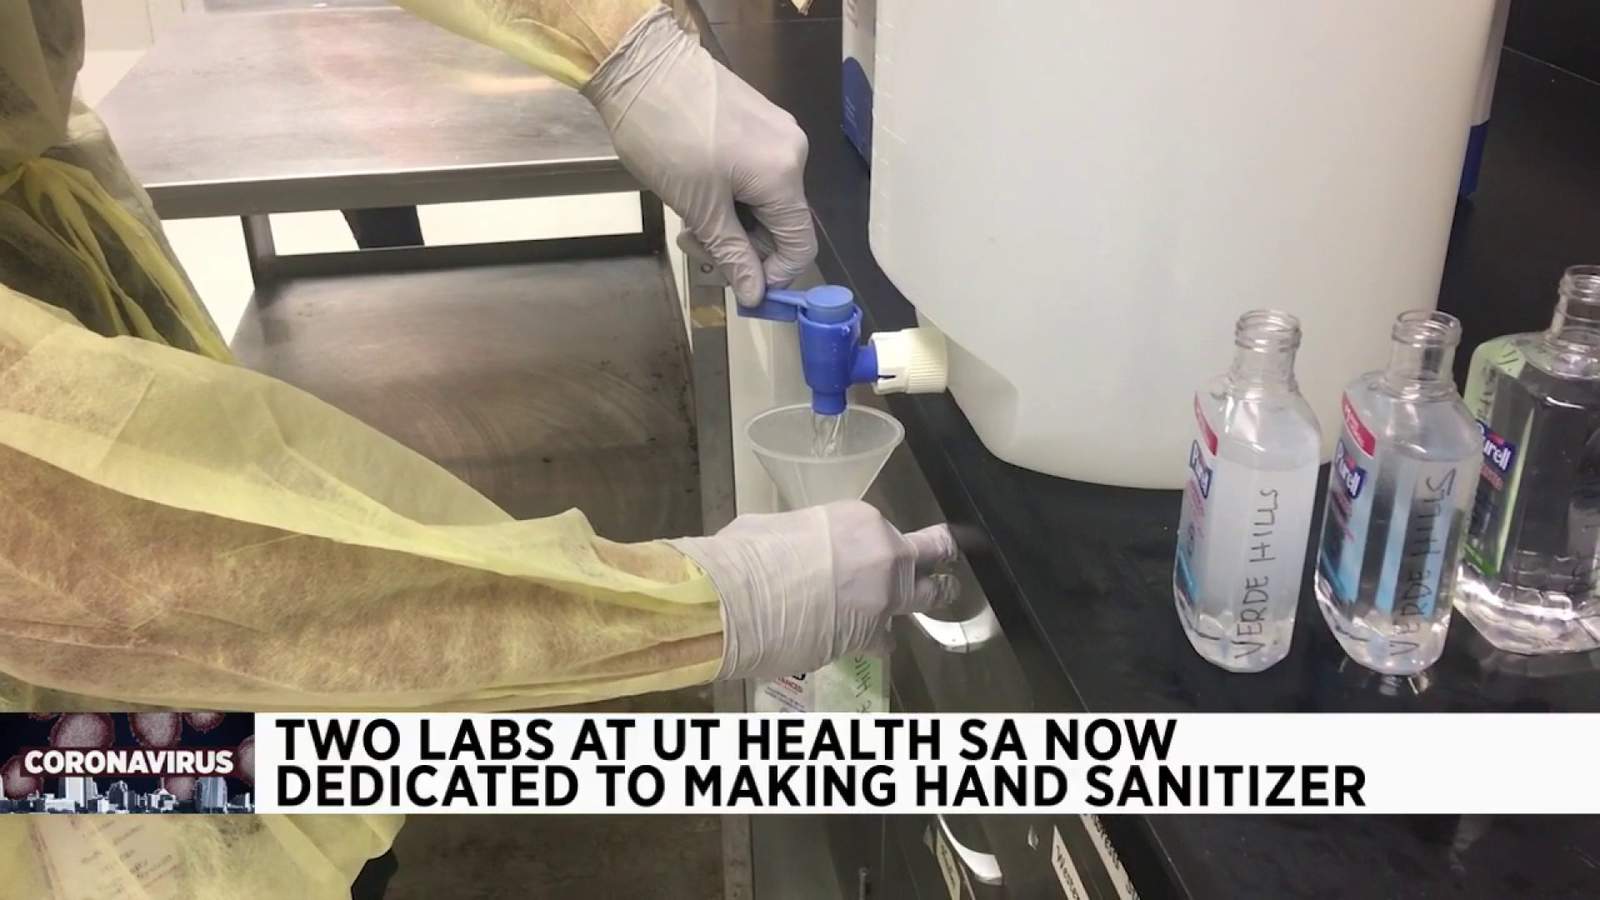 Two labs at UT Health San Antonio dedicated to make hand sanitizer for frontline workers